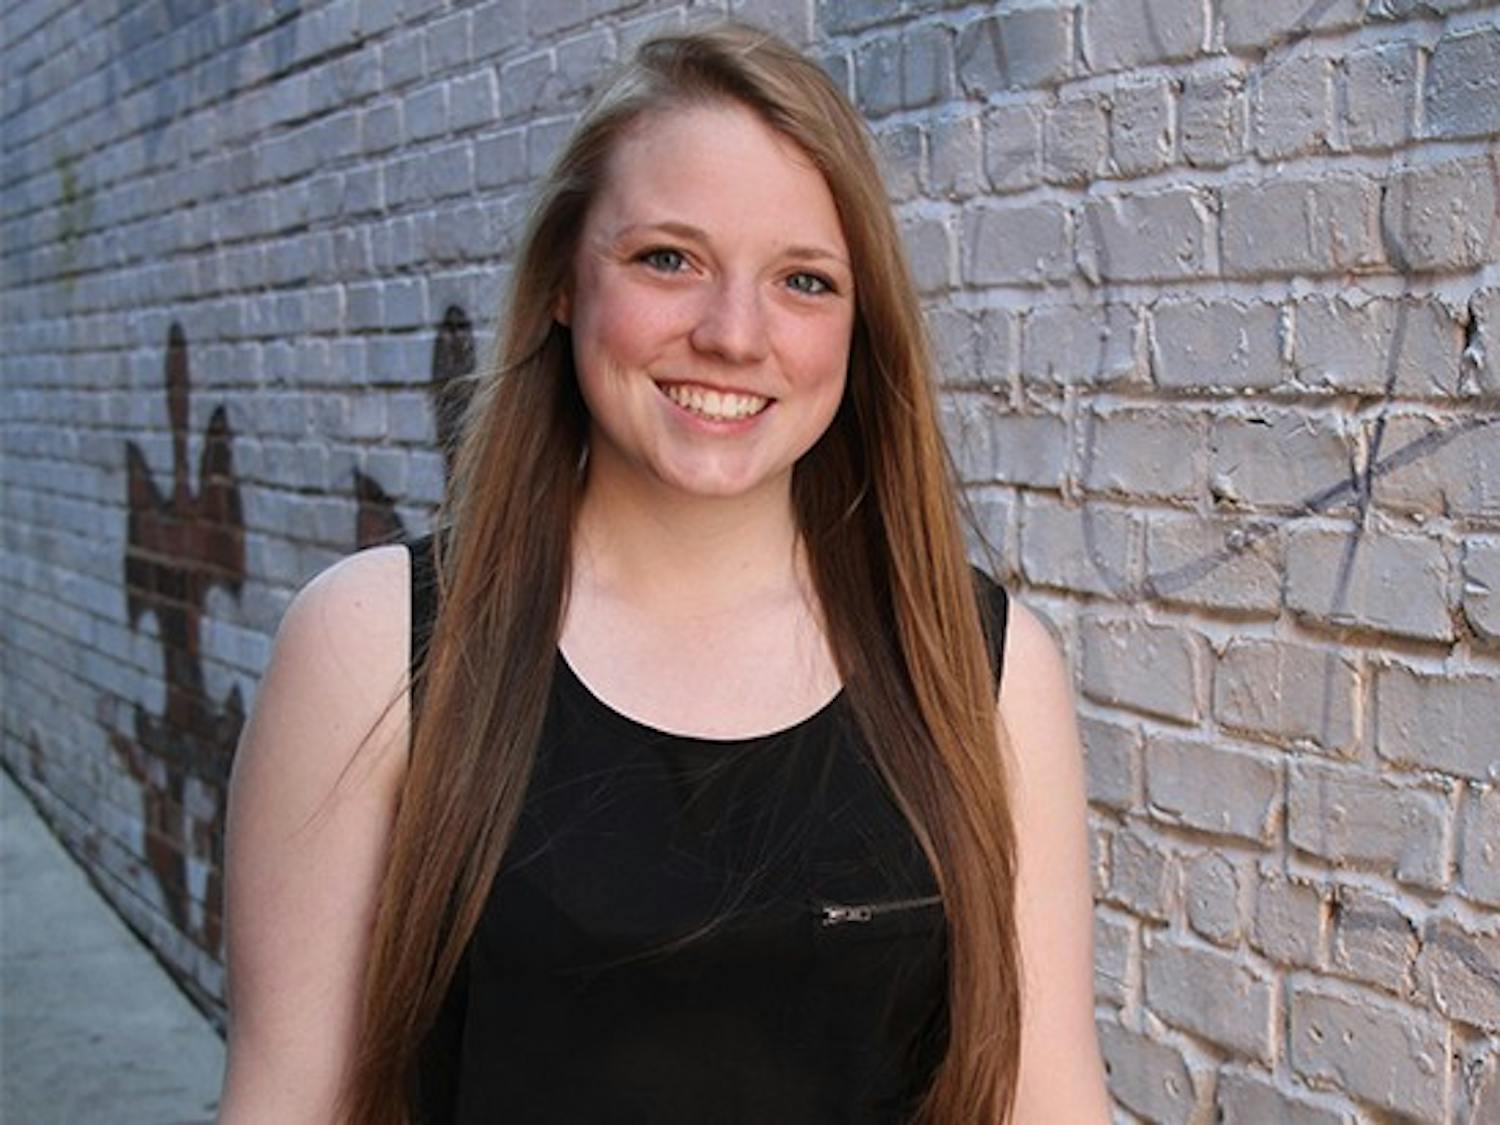 Jenny Surane was elected as editor-in-chief for the 2014-15 school year.